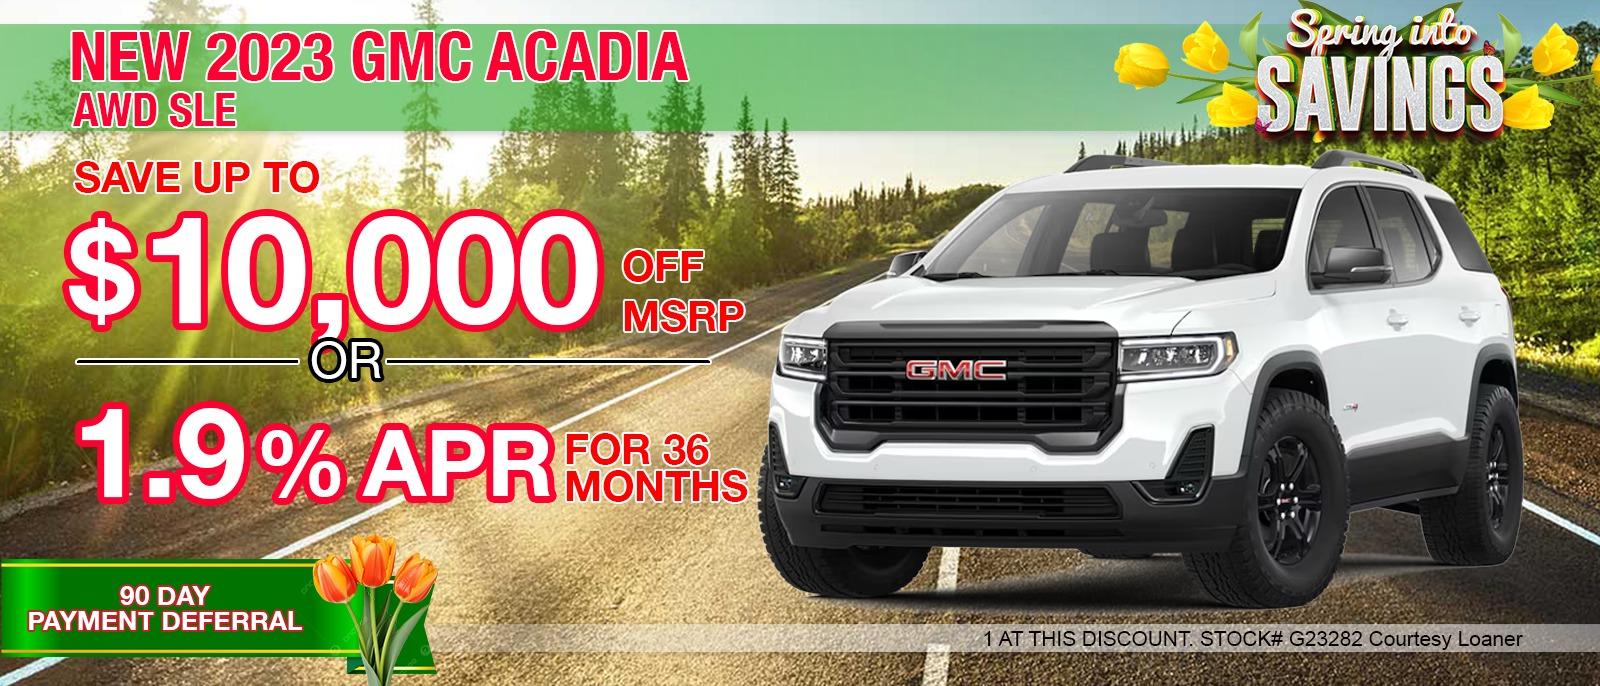 2023 GMC ACADIA AWD SLE.  SAVE UP TO $10,000 OFF MSRP.